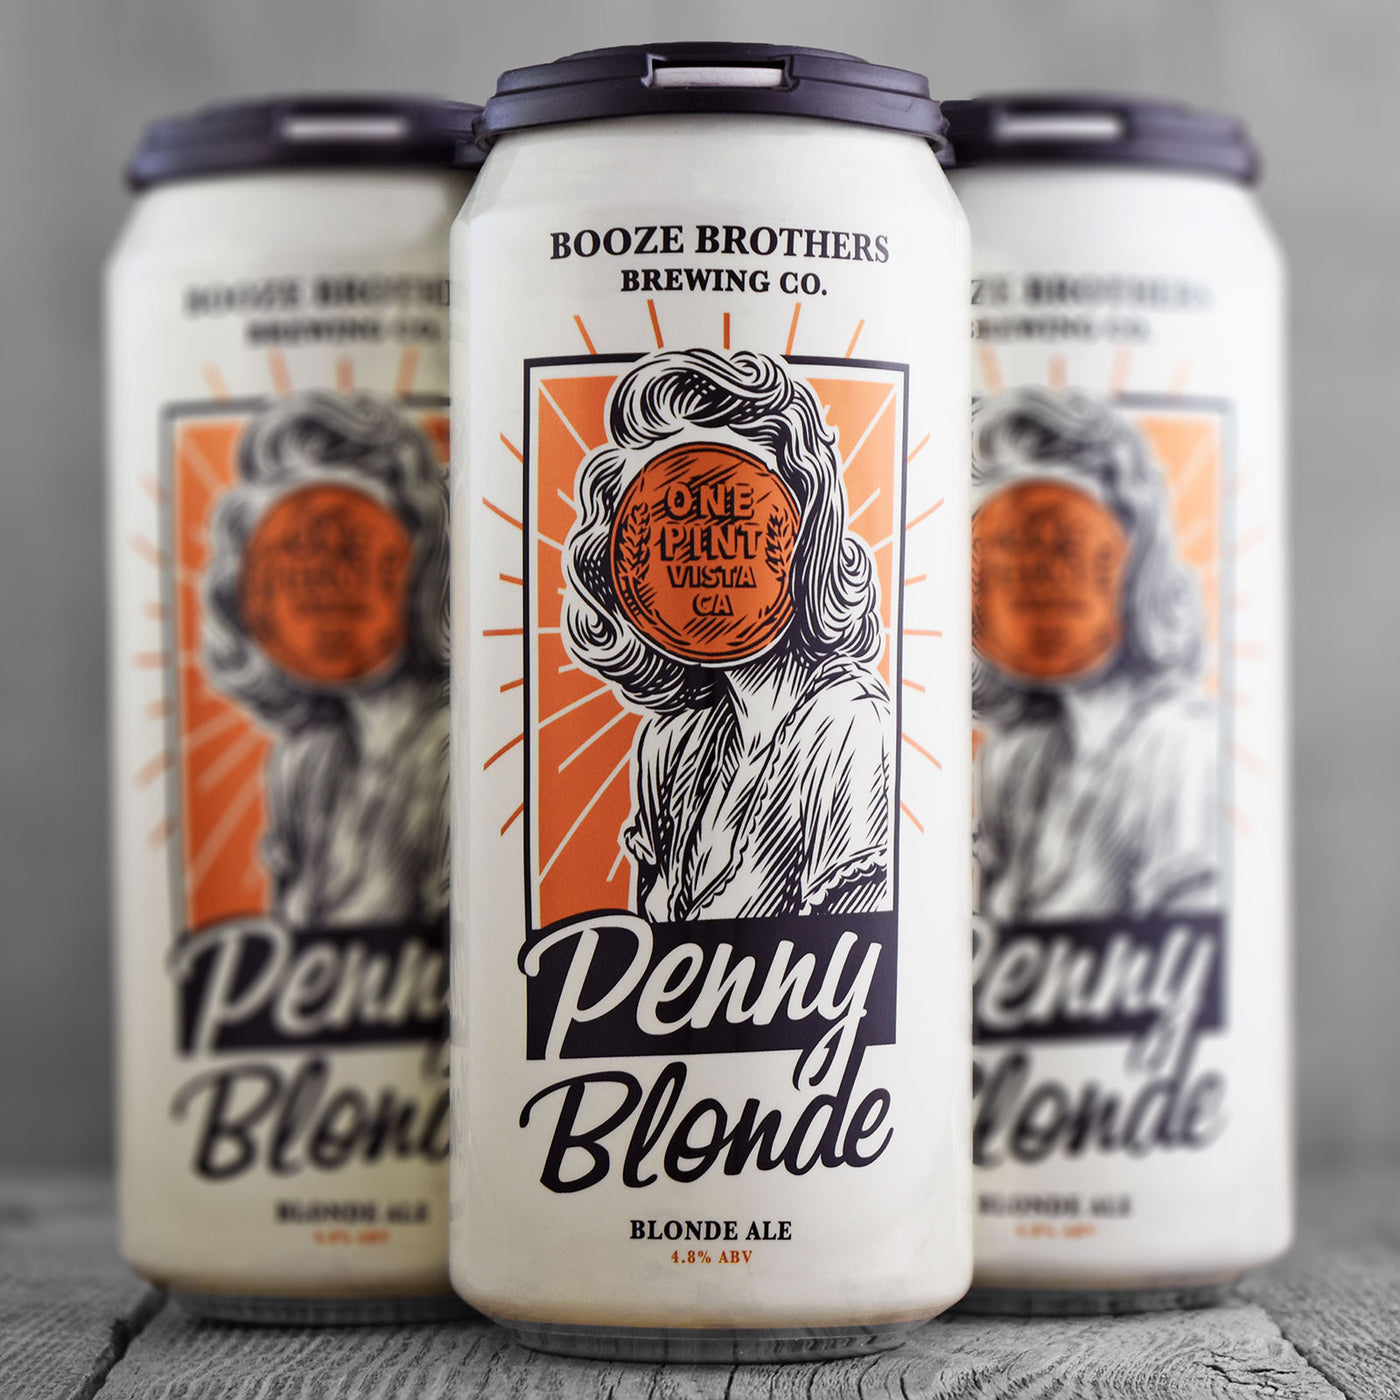 Booze Brothers Penny Blonde